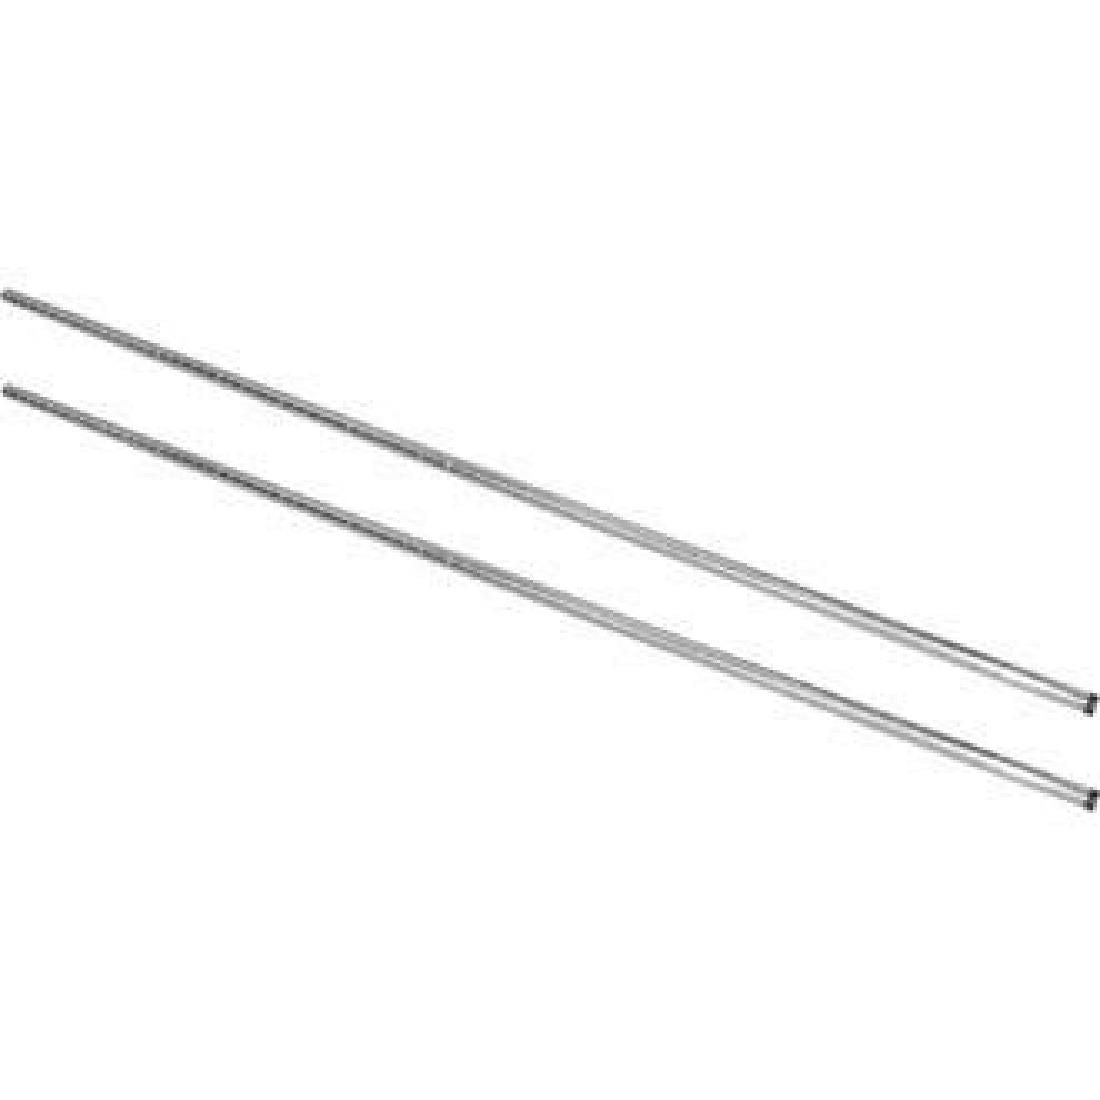 Vogue Chrome Upright Posts 1830mm (Pack of 2)